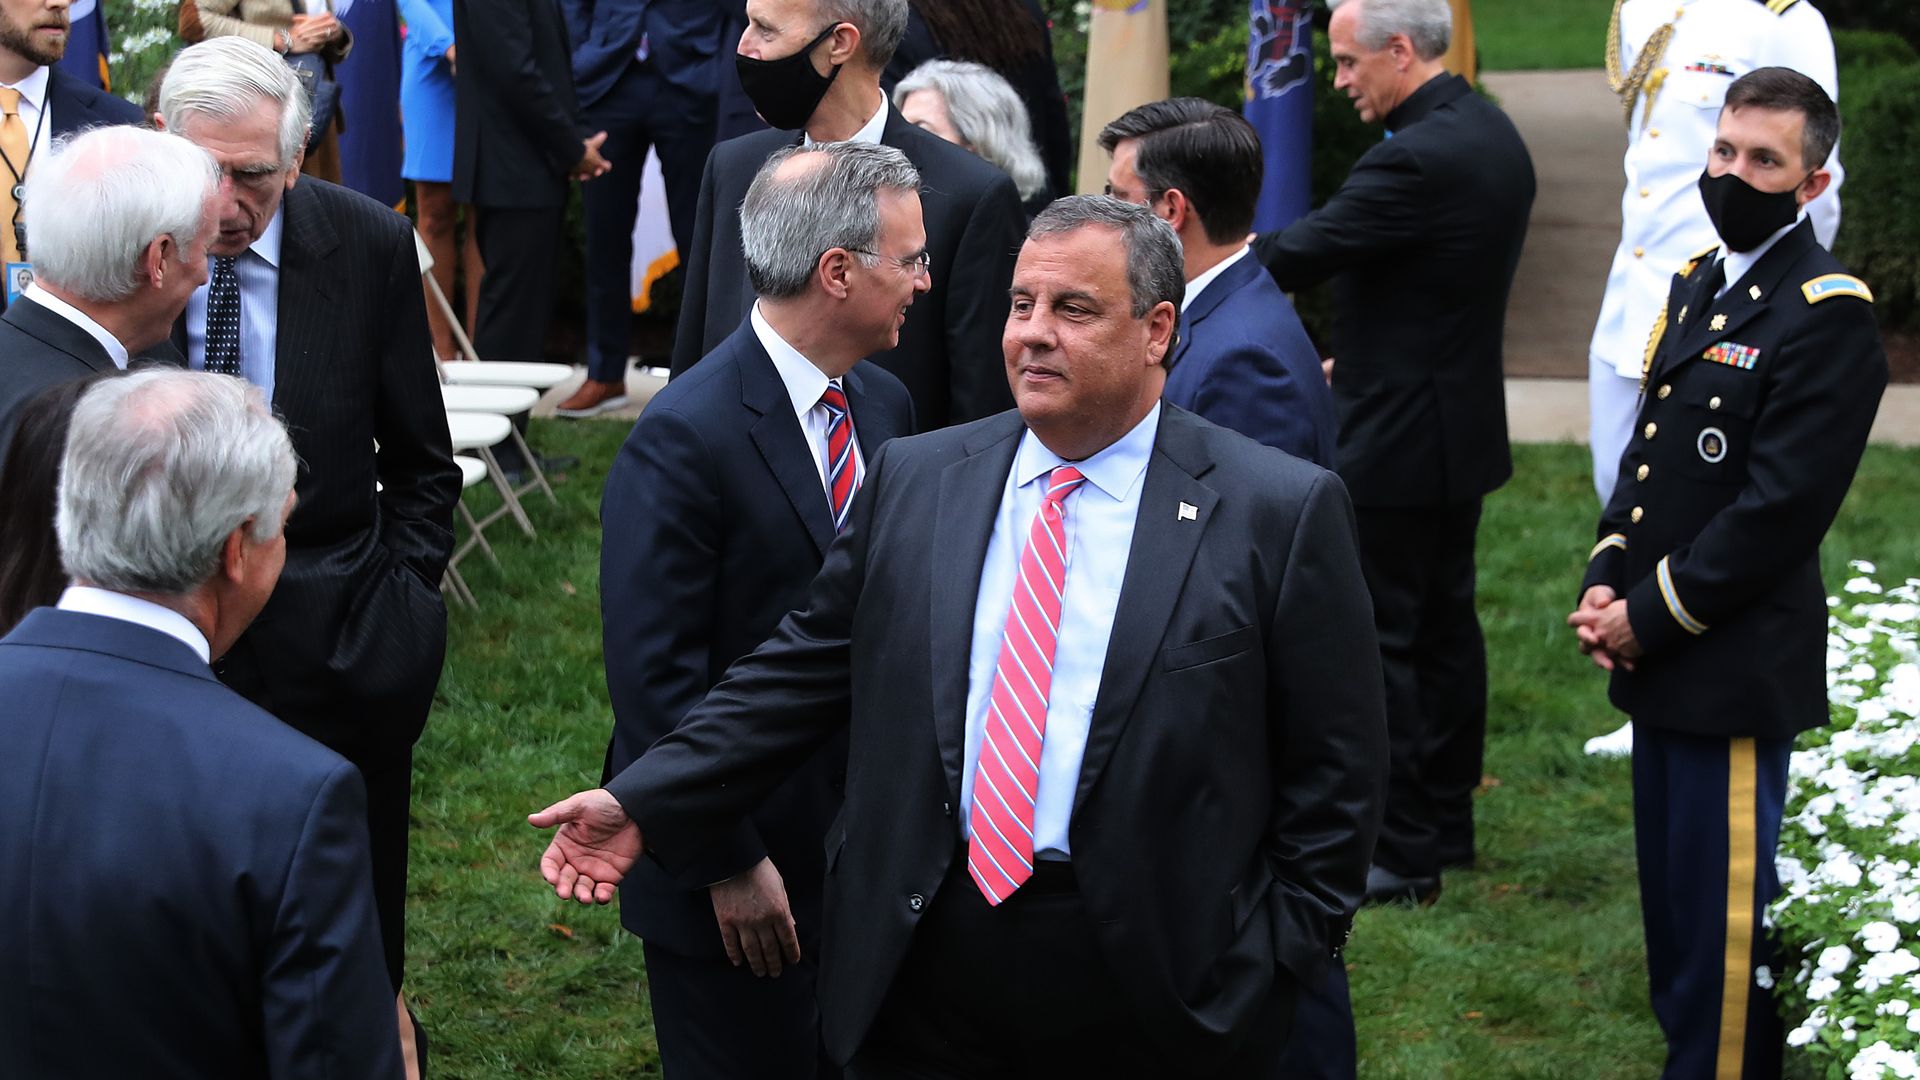 Former New Jersey Governor Chris Christie (C) talks with guests in the Rose Garden in September